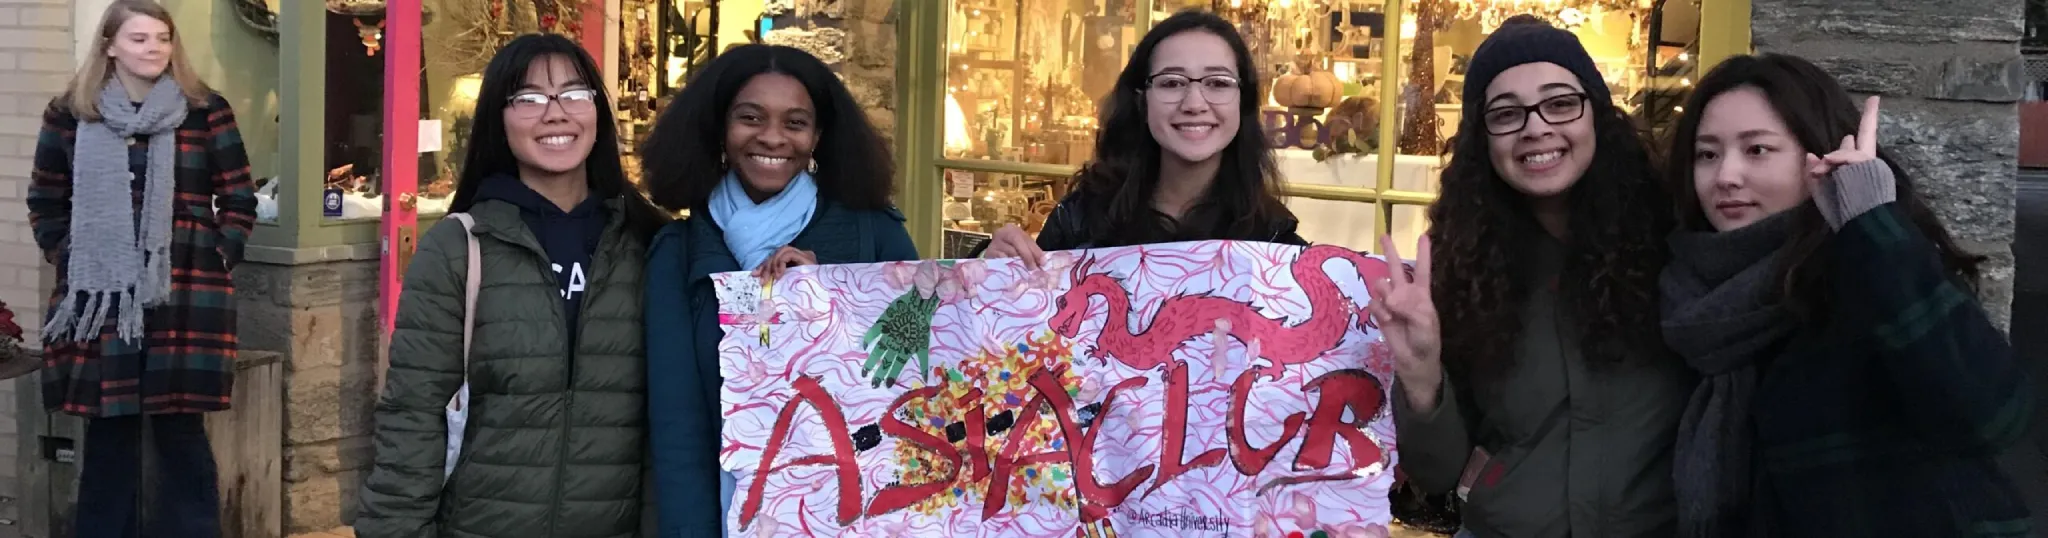 Students holding a poster celebrating Asian culture